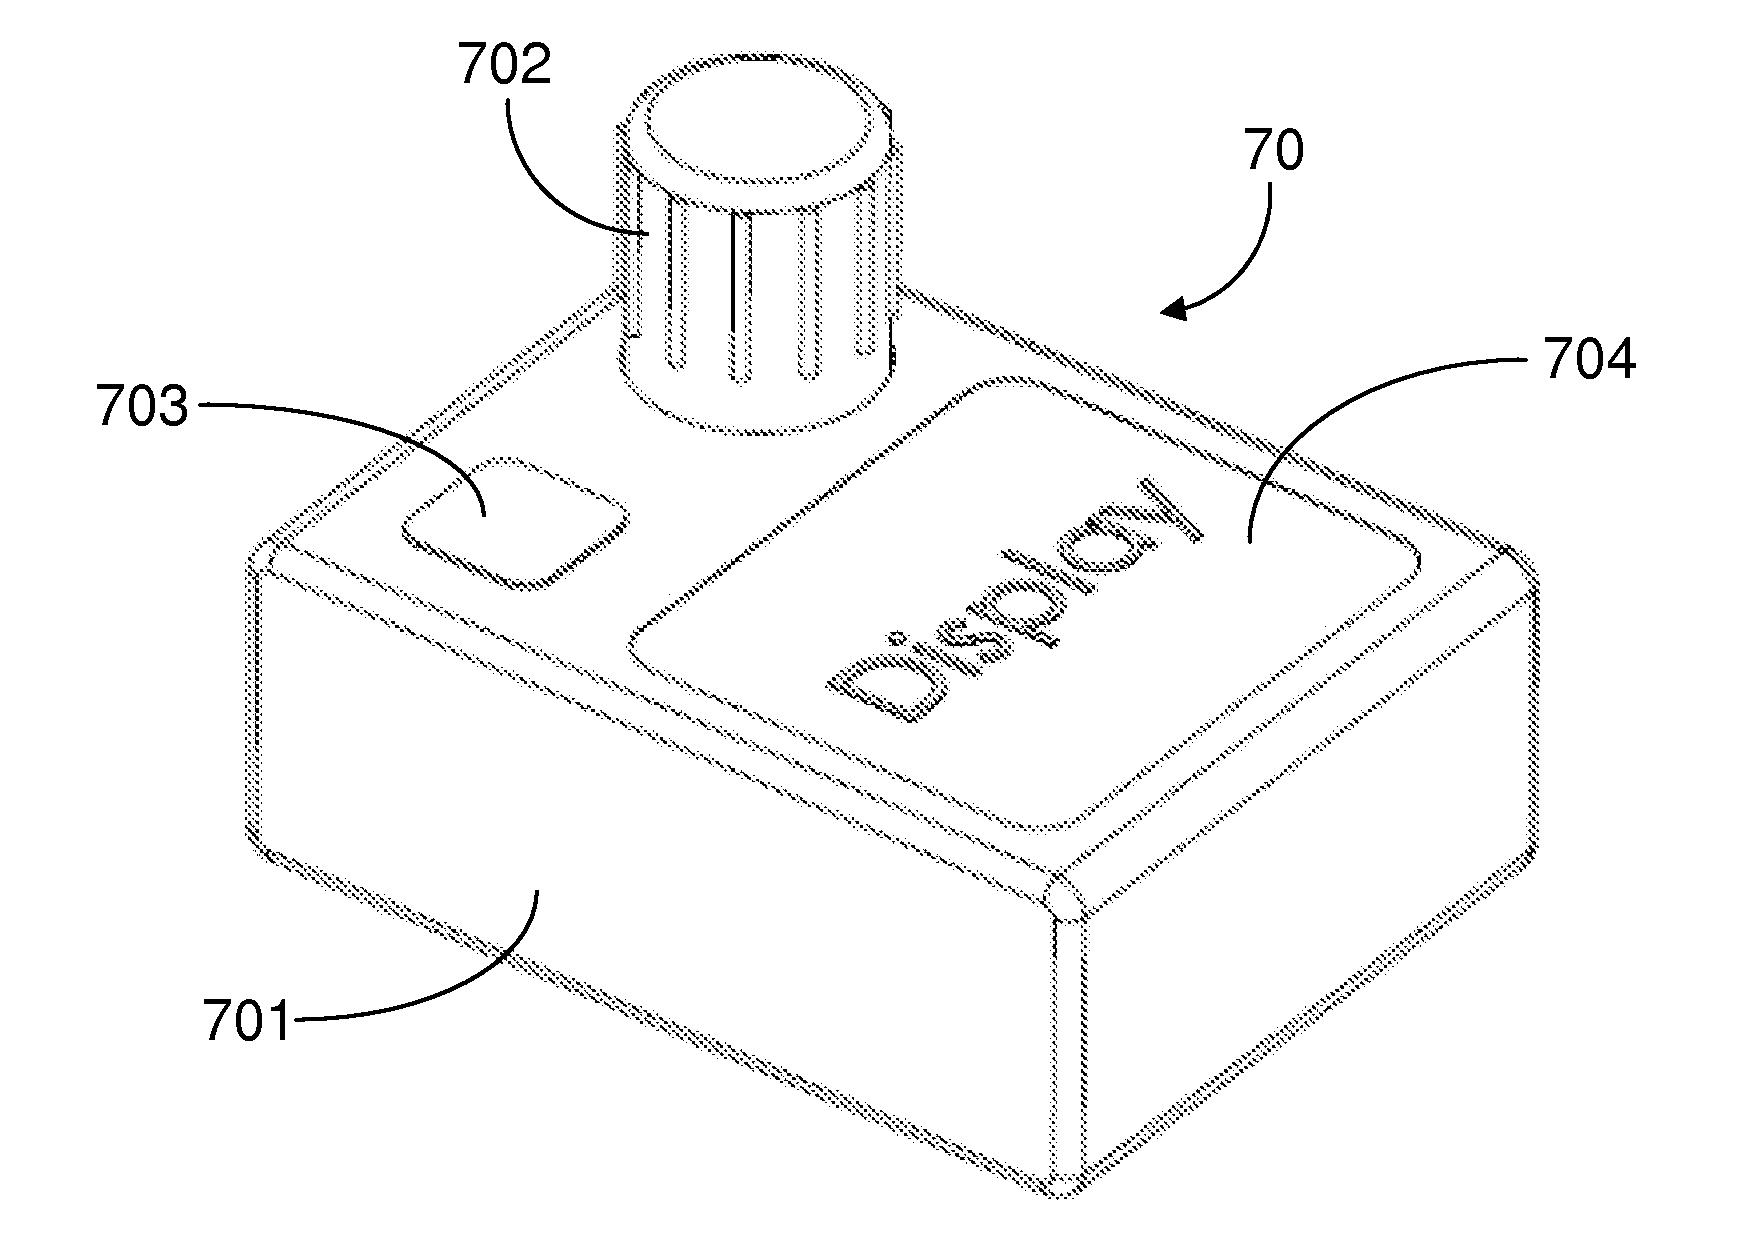 Method For Developing Parenteral Therapeutic Product With Drug Delivery Device Through Clinical Trial